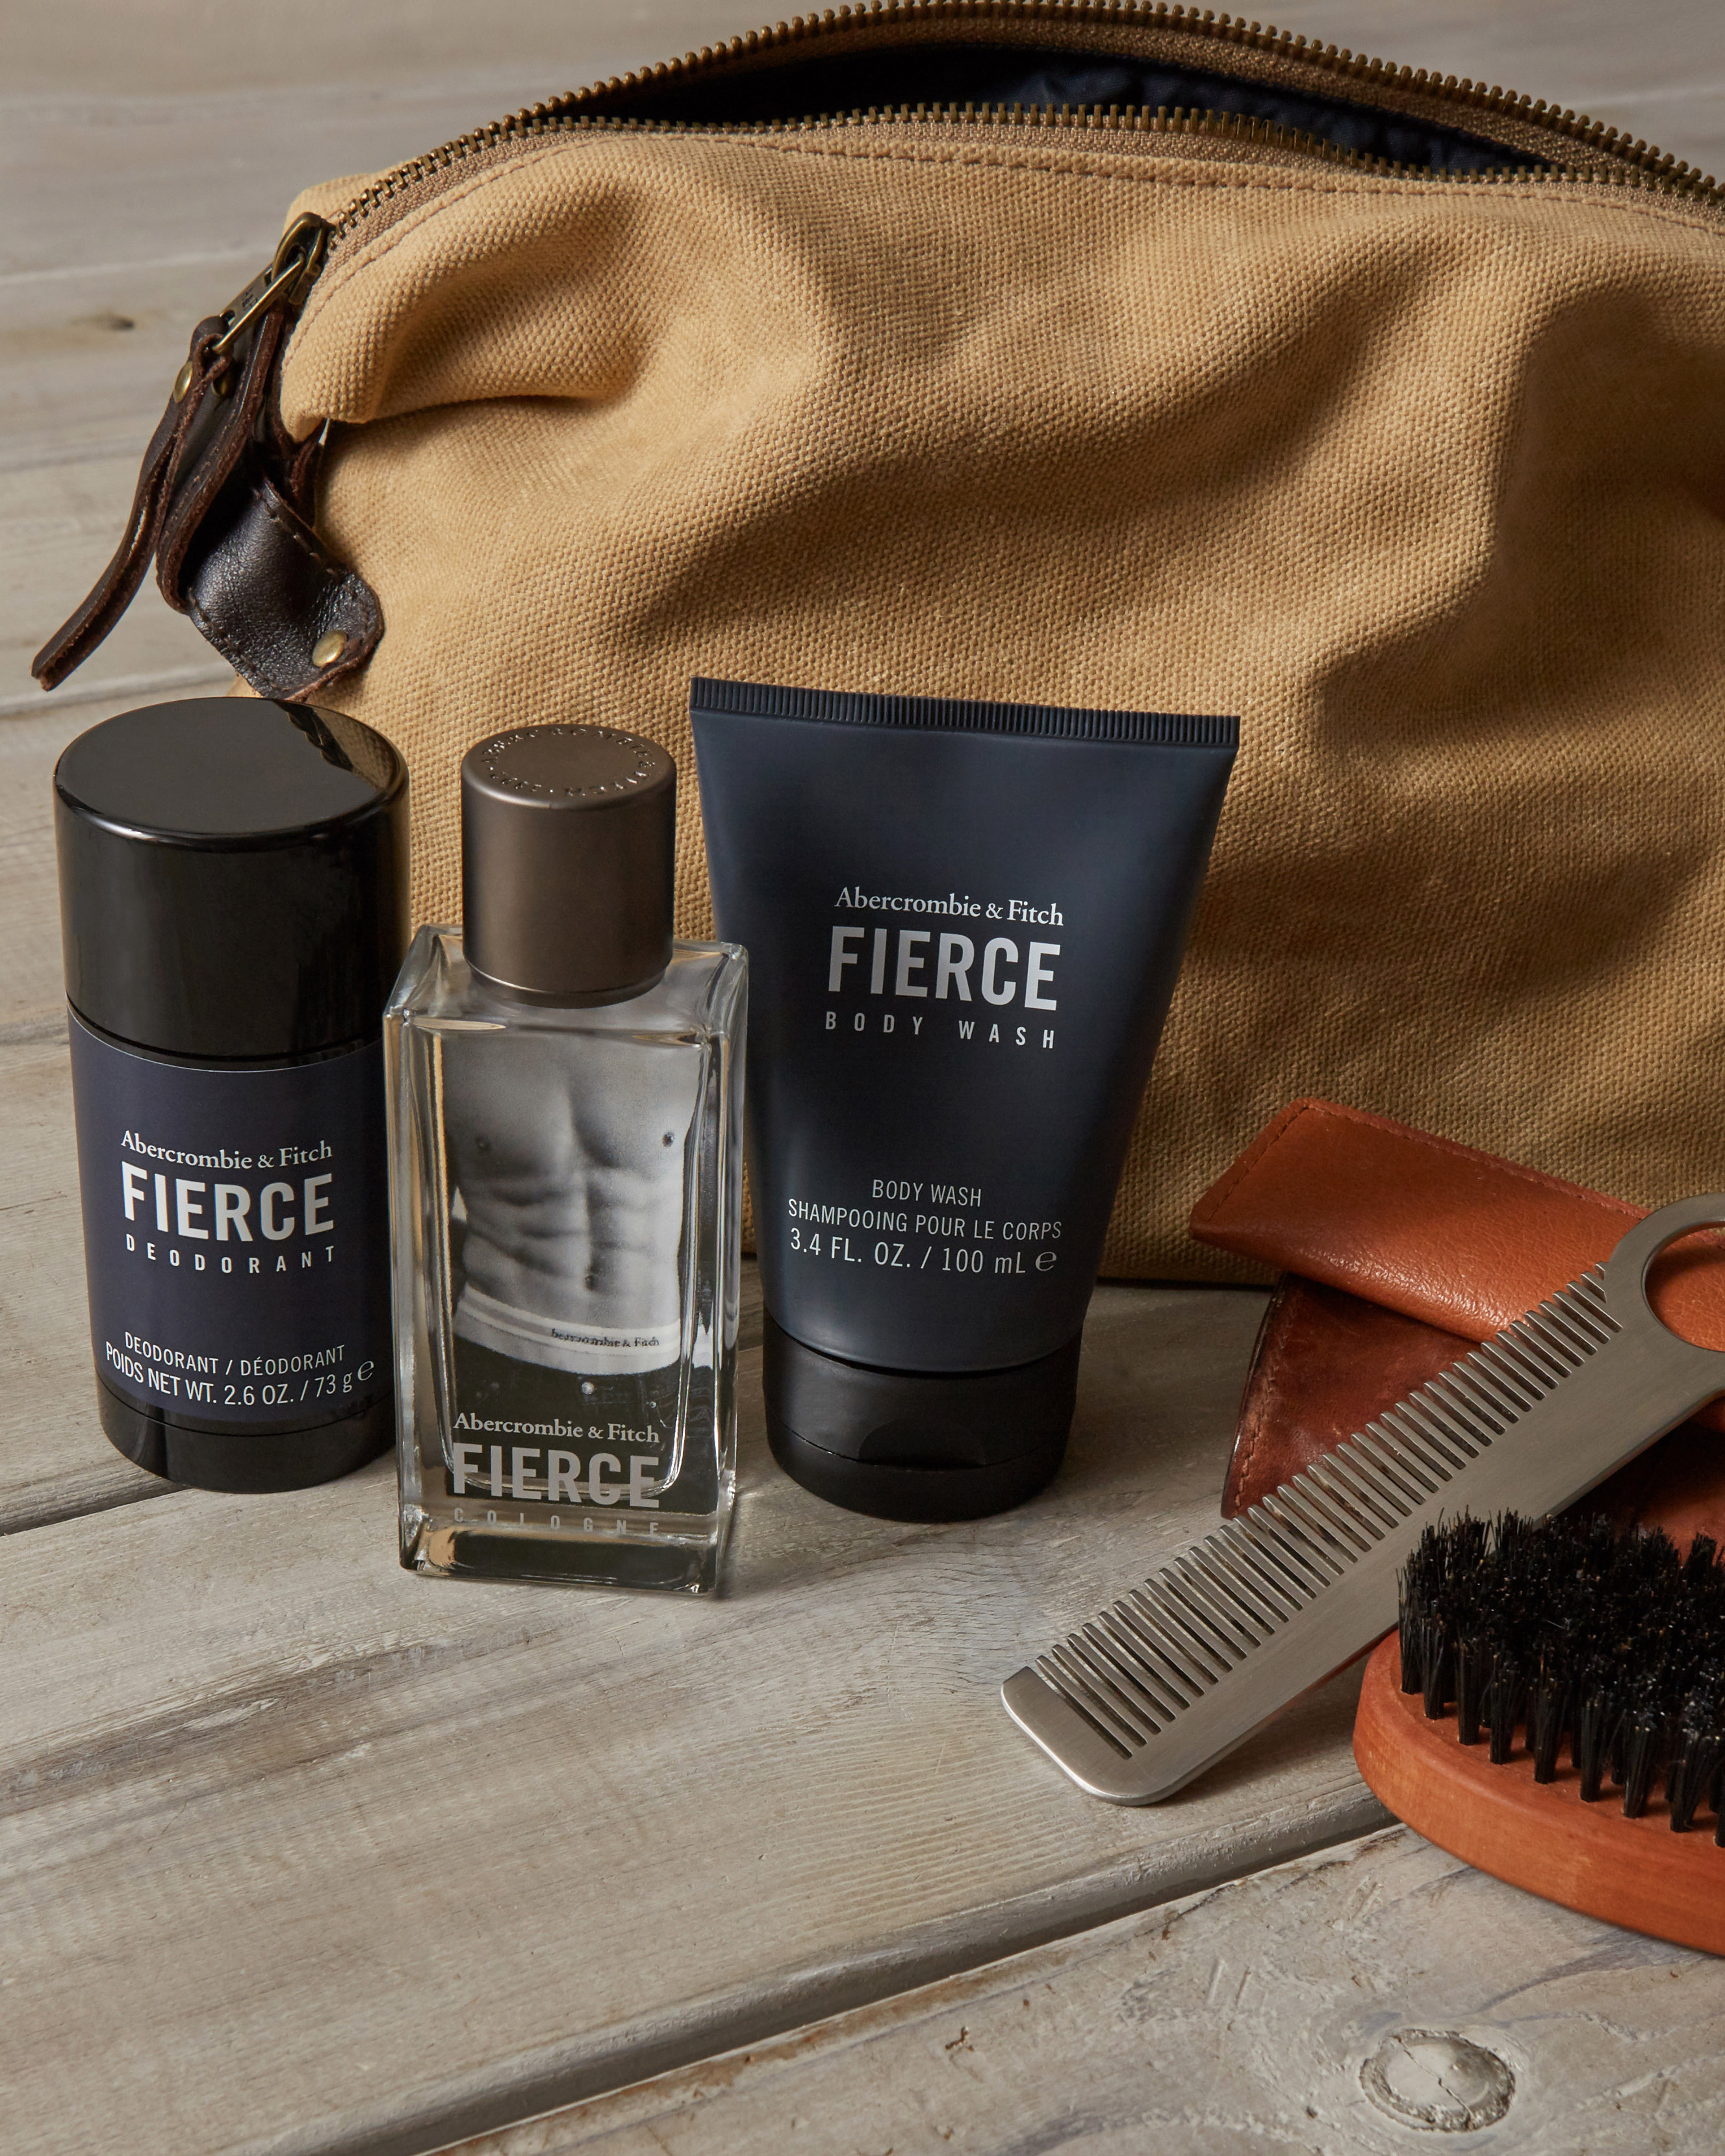 Abercrombie & Fitch on Twitter: "INTRODUCING: The Fierce Weekend Kit — build upon your favorite fragrance with all-in-one essentials that are just as iconic. #abercrombiemens Shop Fierce: https://t.co/SBjCemiJg0 https://t.co/vJdhdO55GL" / Twitter